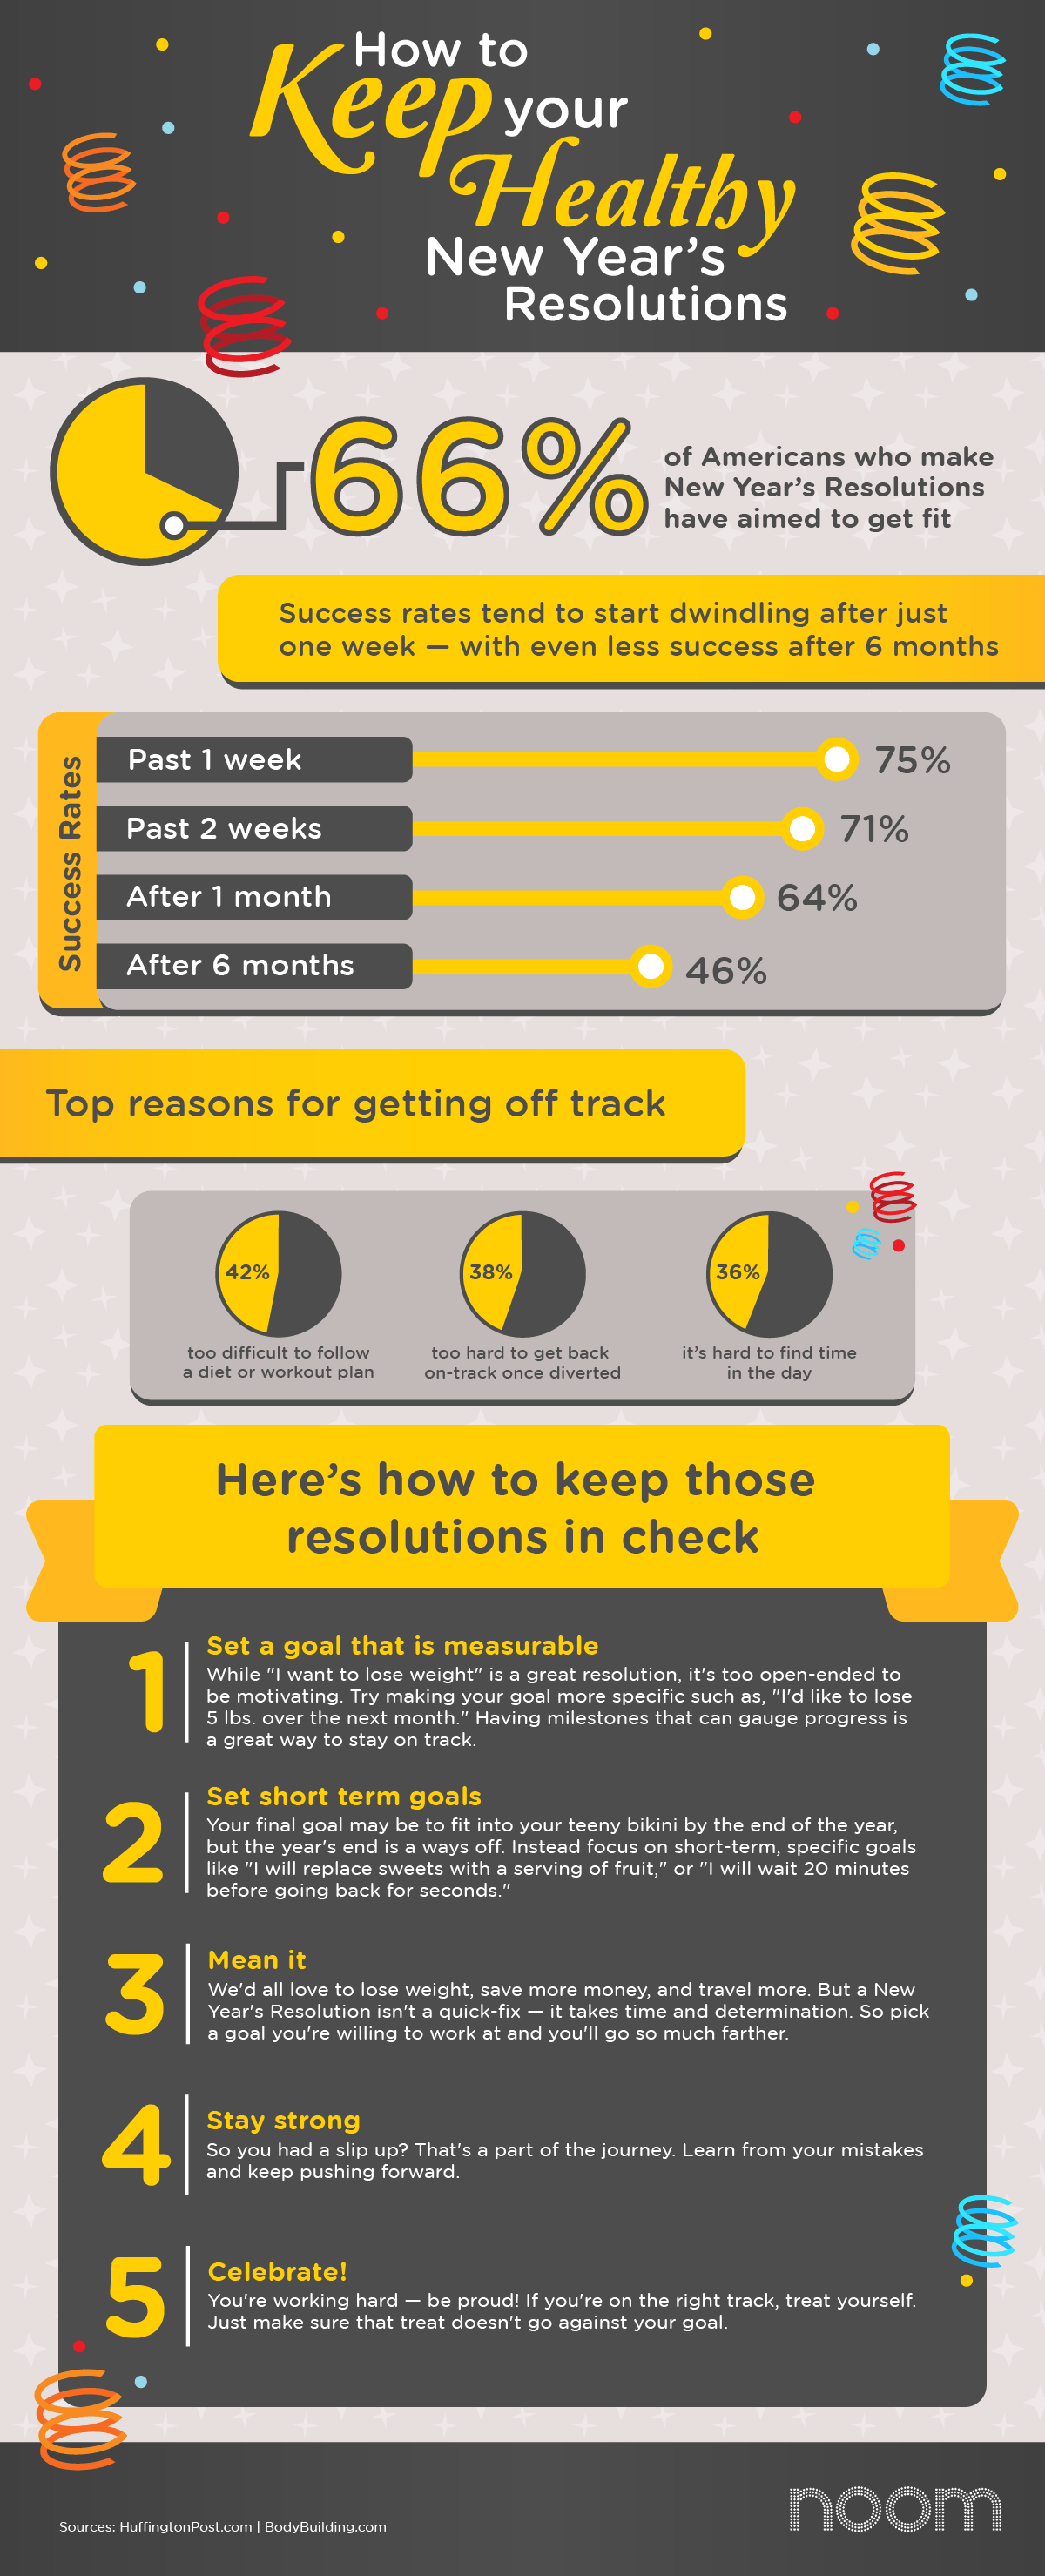 How To Stick To Your New Year's Resolutions | Daily Infographic